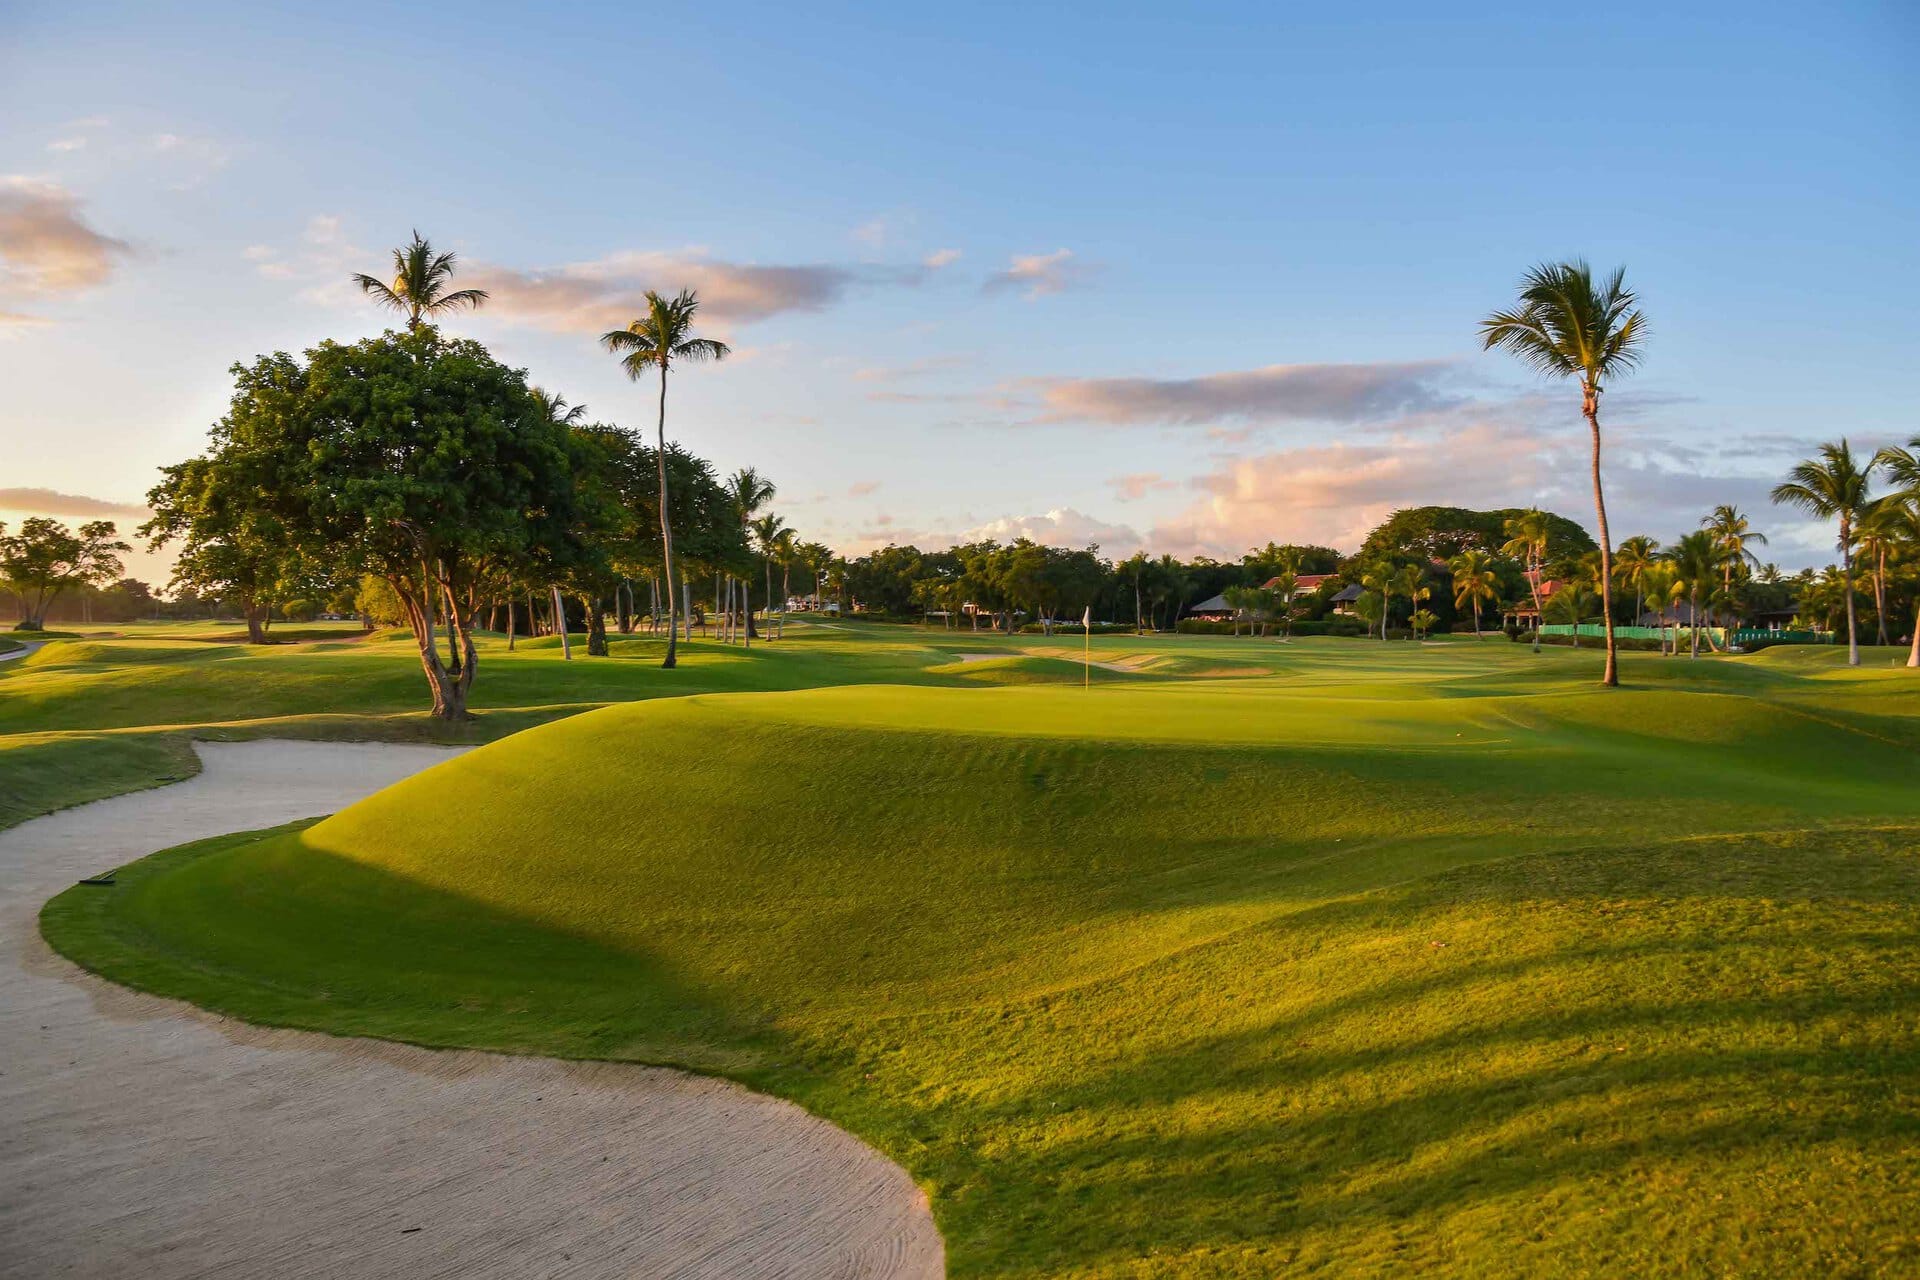 Unlimited Golf Packages at Casa de Campo in the Dominican Republic